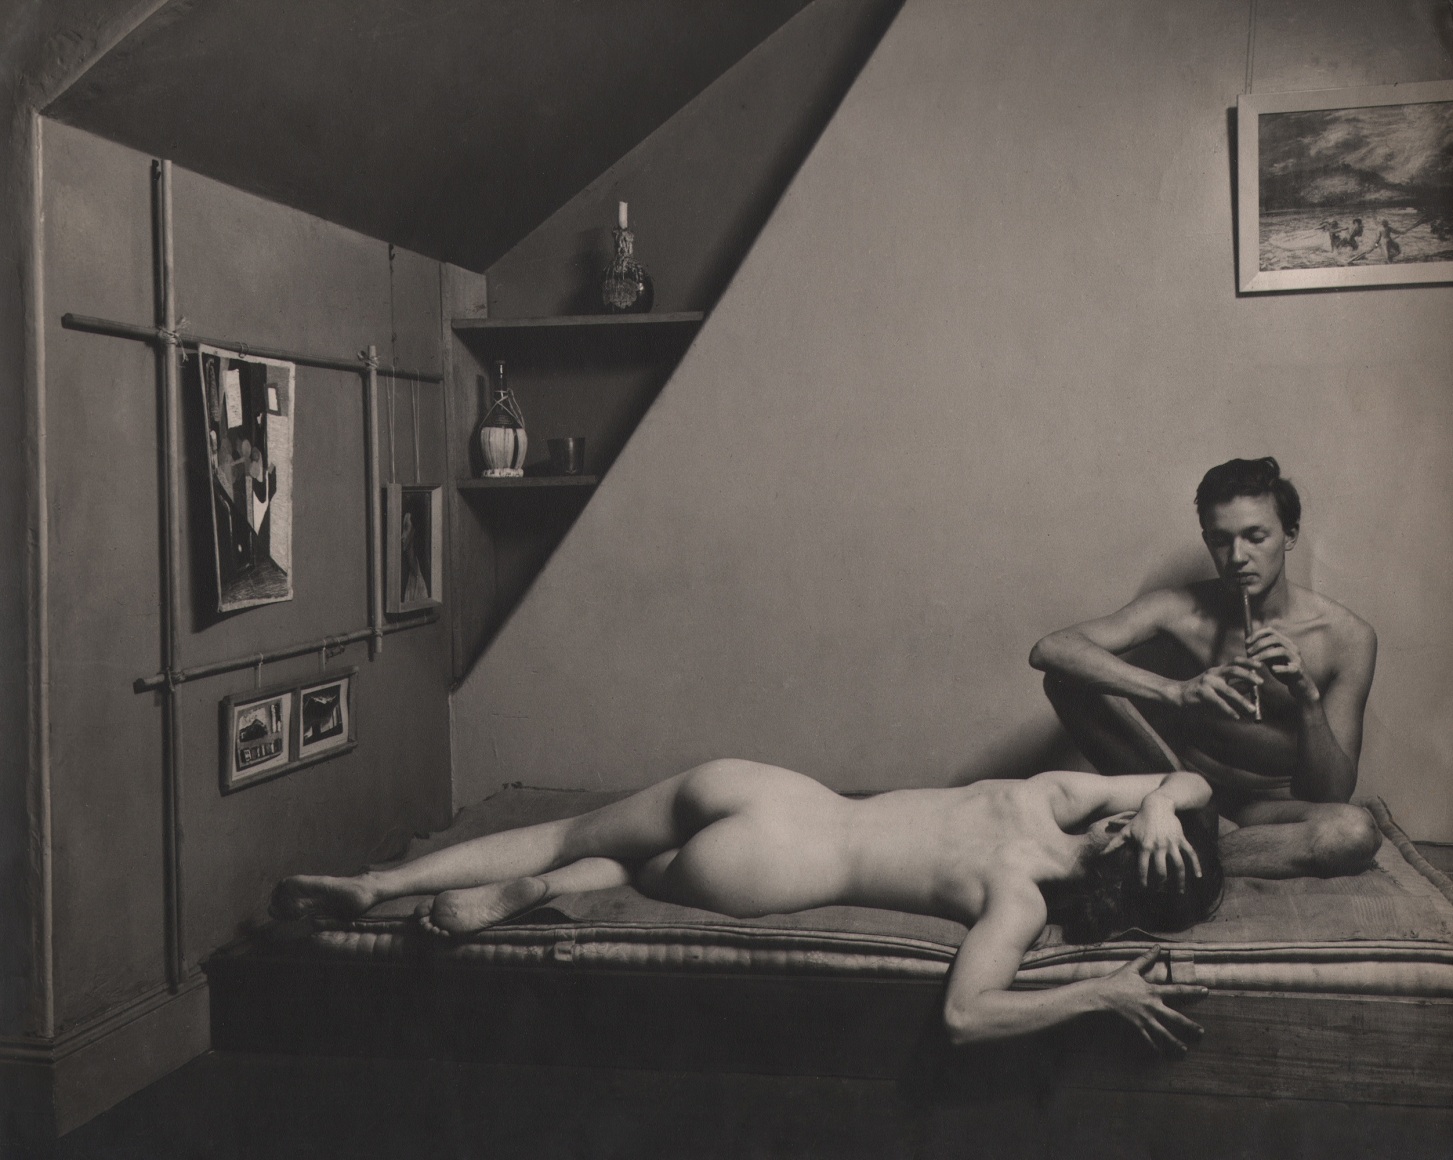 36. N.M.W. Mansill, Untitled, c. 1956. Lounging nude man and woman. The man is seated playing a small pipe, the woman laying down.